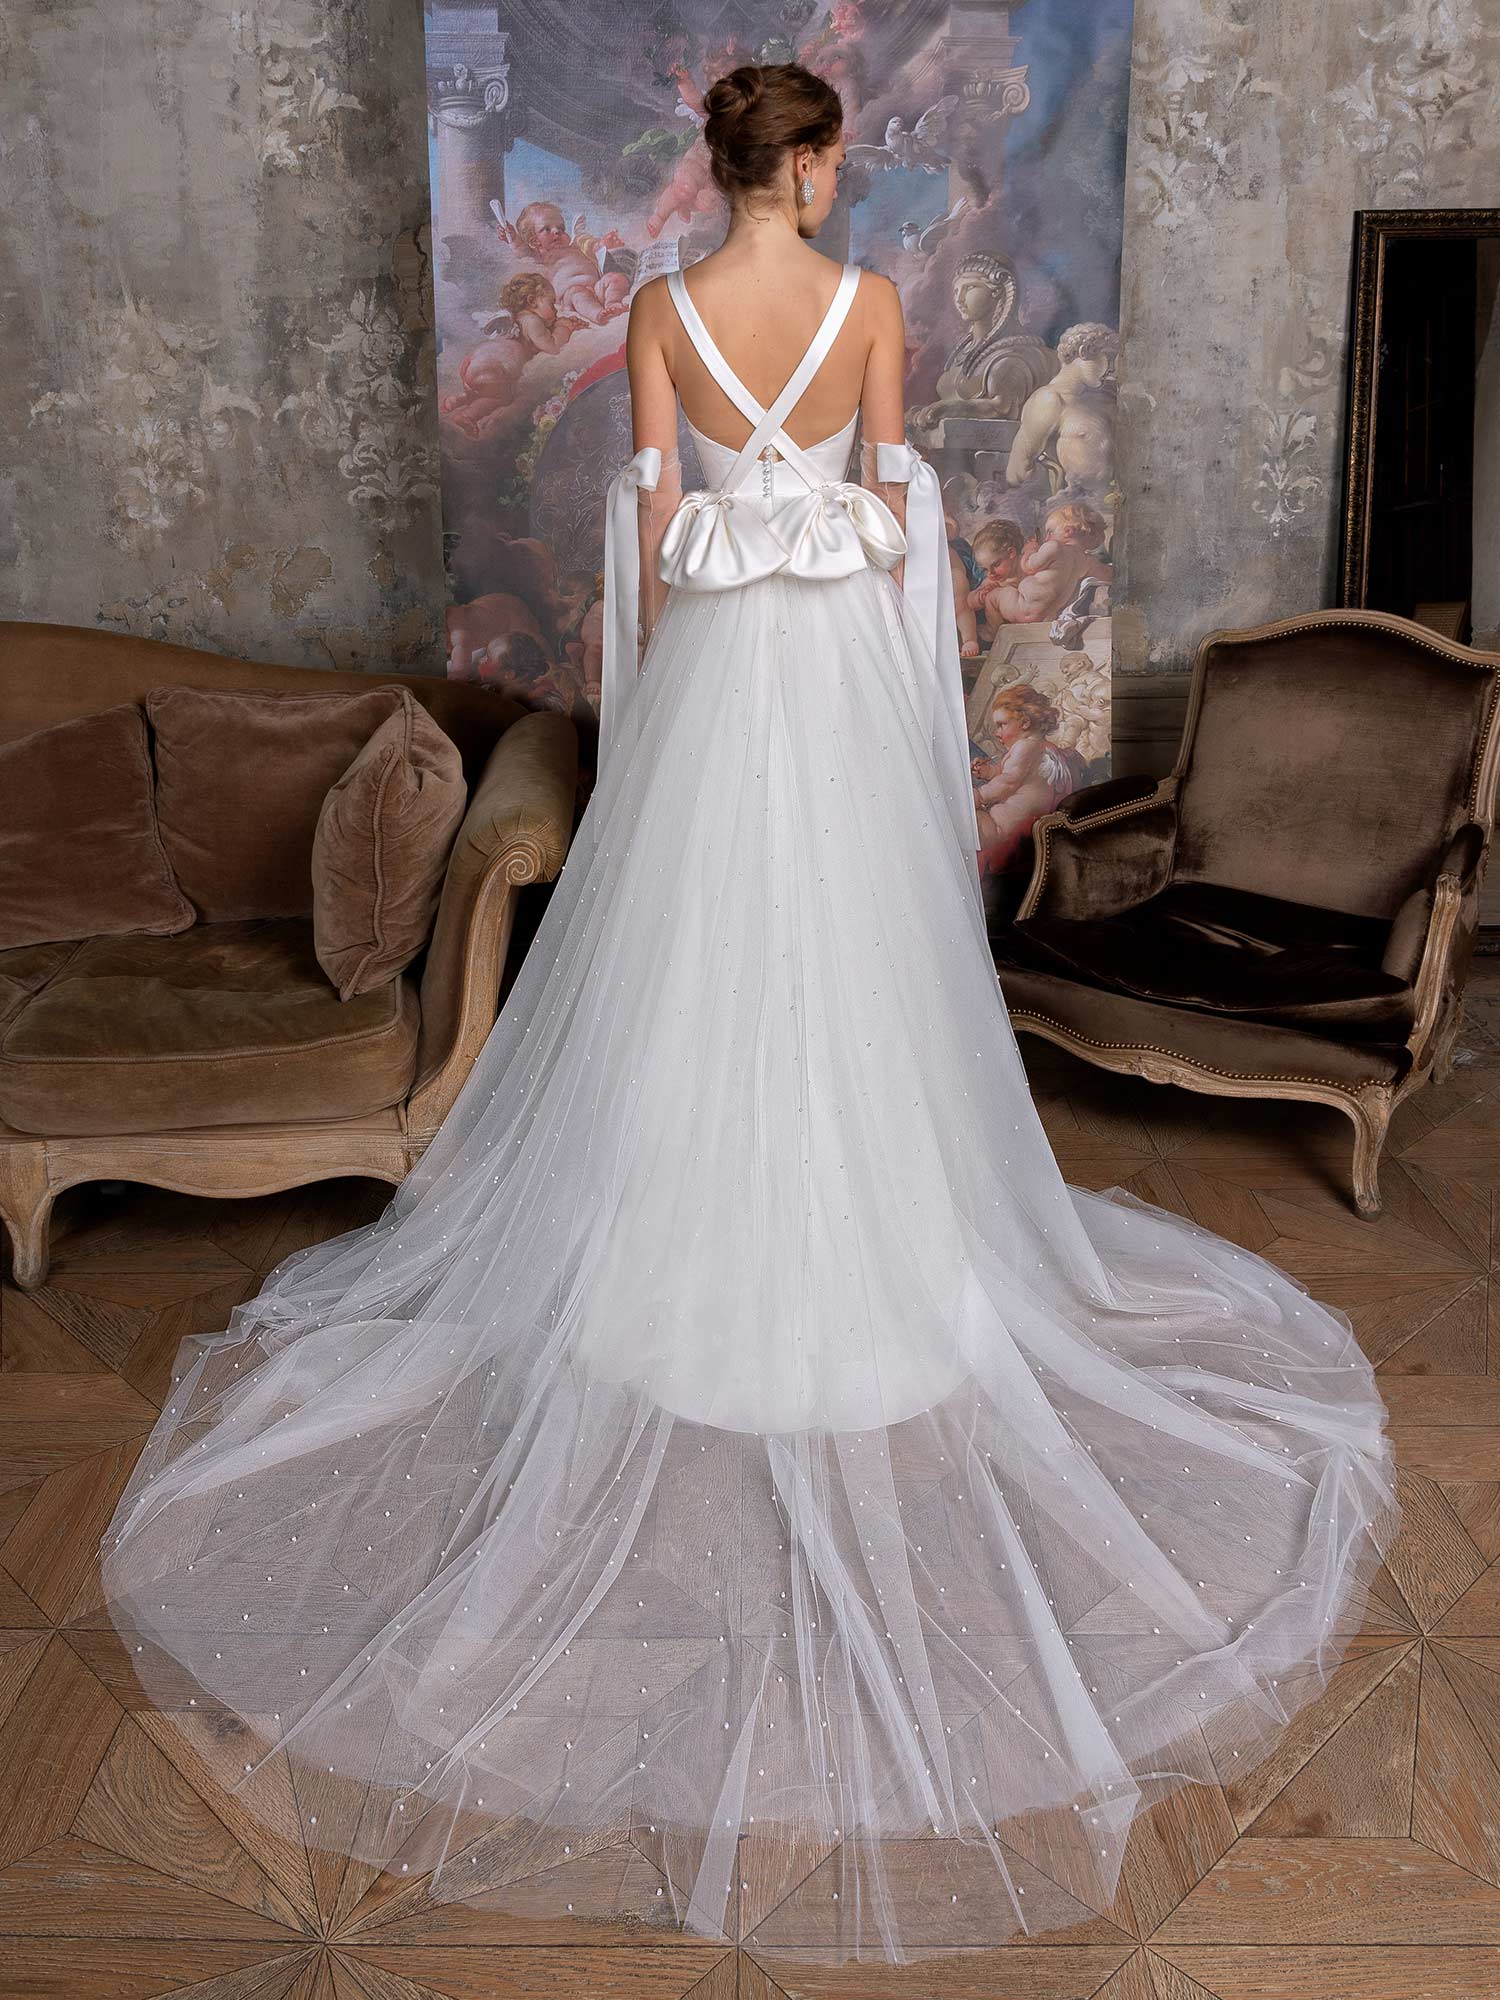 Style #2320L, pearl skirt A-line wedding dress with draped Atlas bodice and bow details; available in ivory